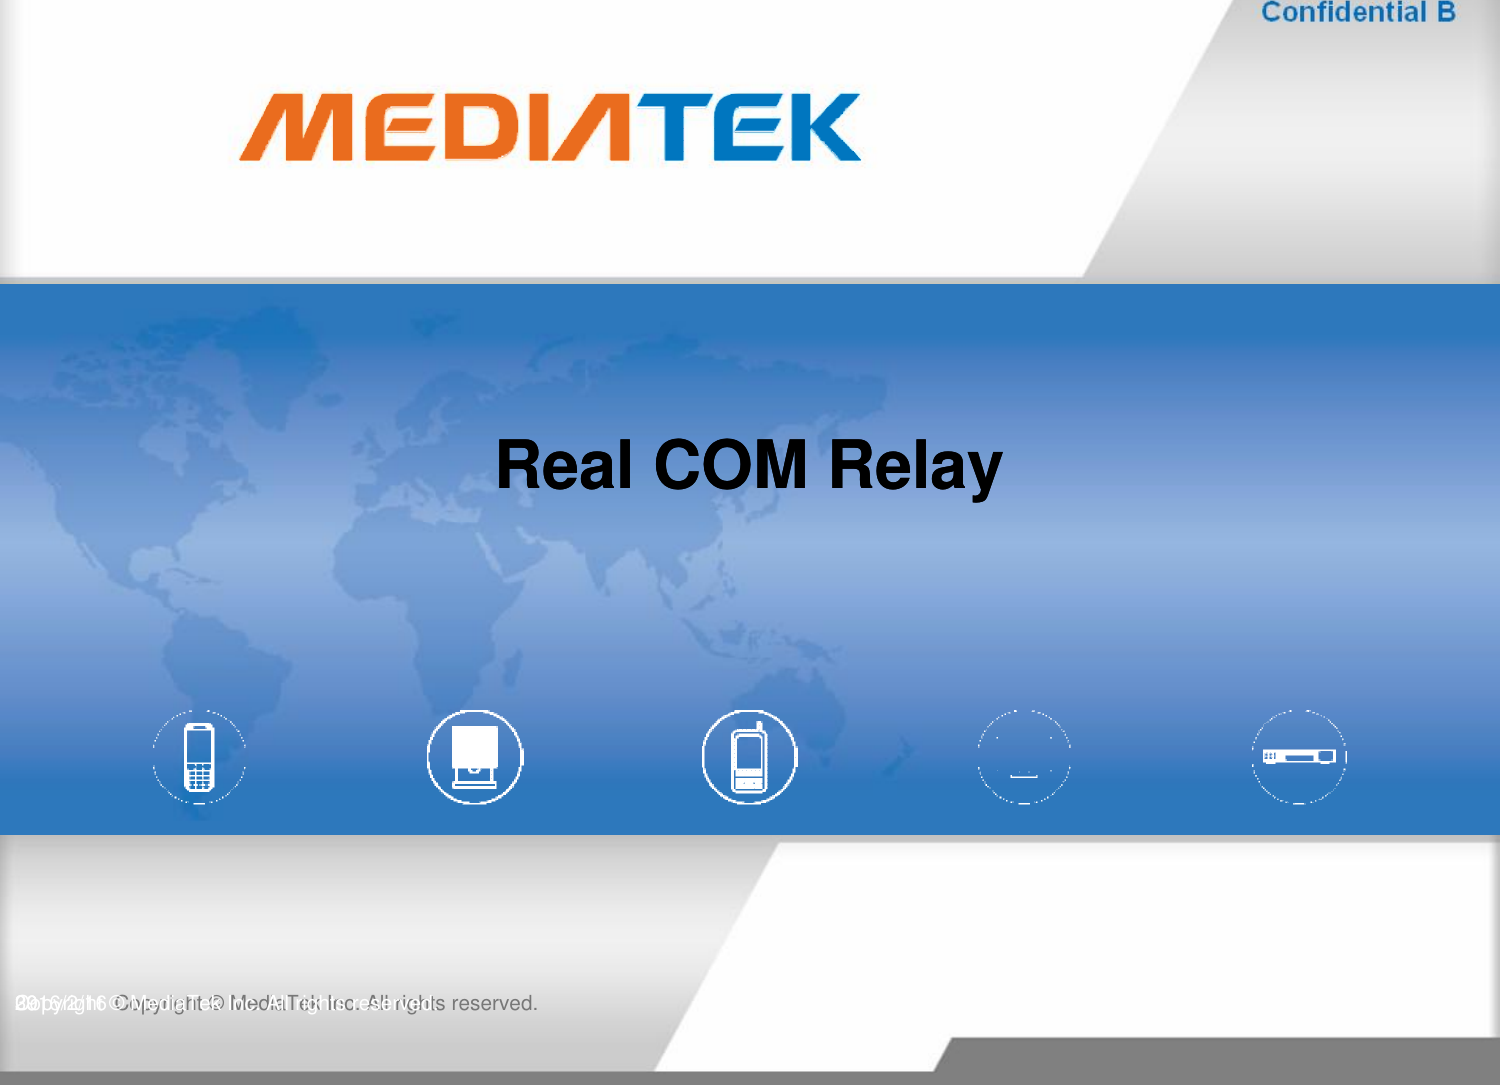 Real COM RelayReal COM RelayCopyright © MediaTekInc. All rights reserved.2016/2/16Copyright © MediaTek Inc. All rights reserved.39